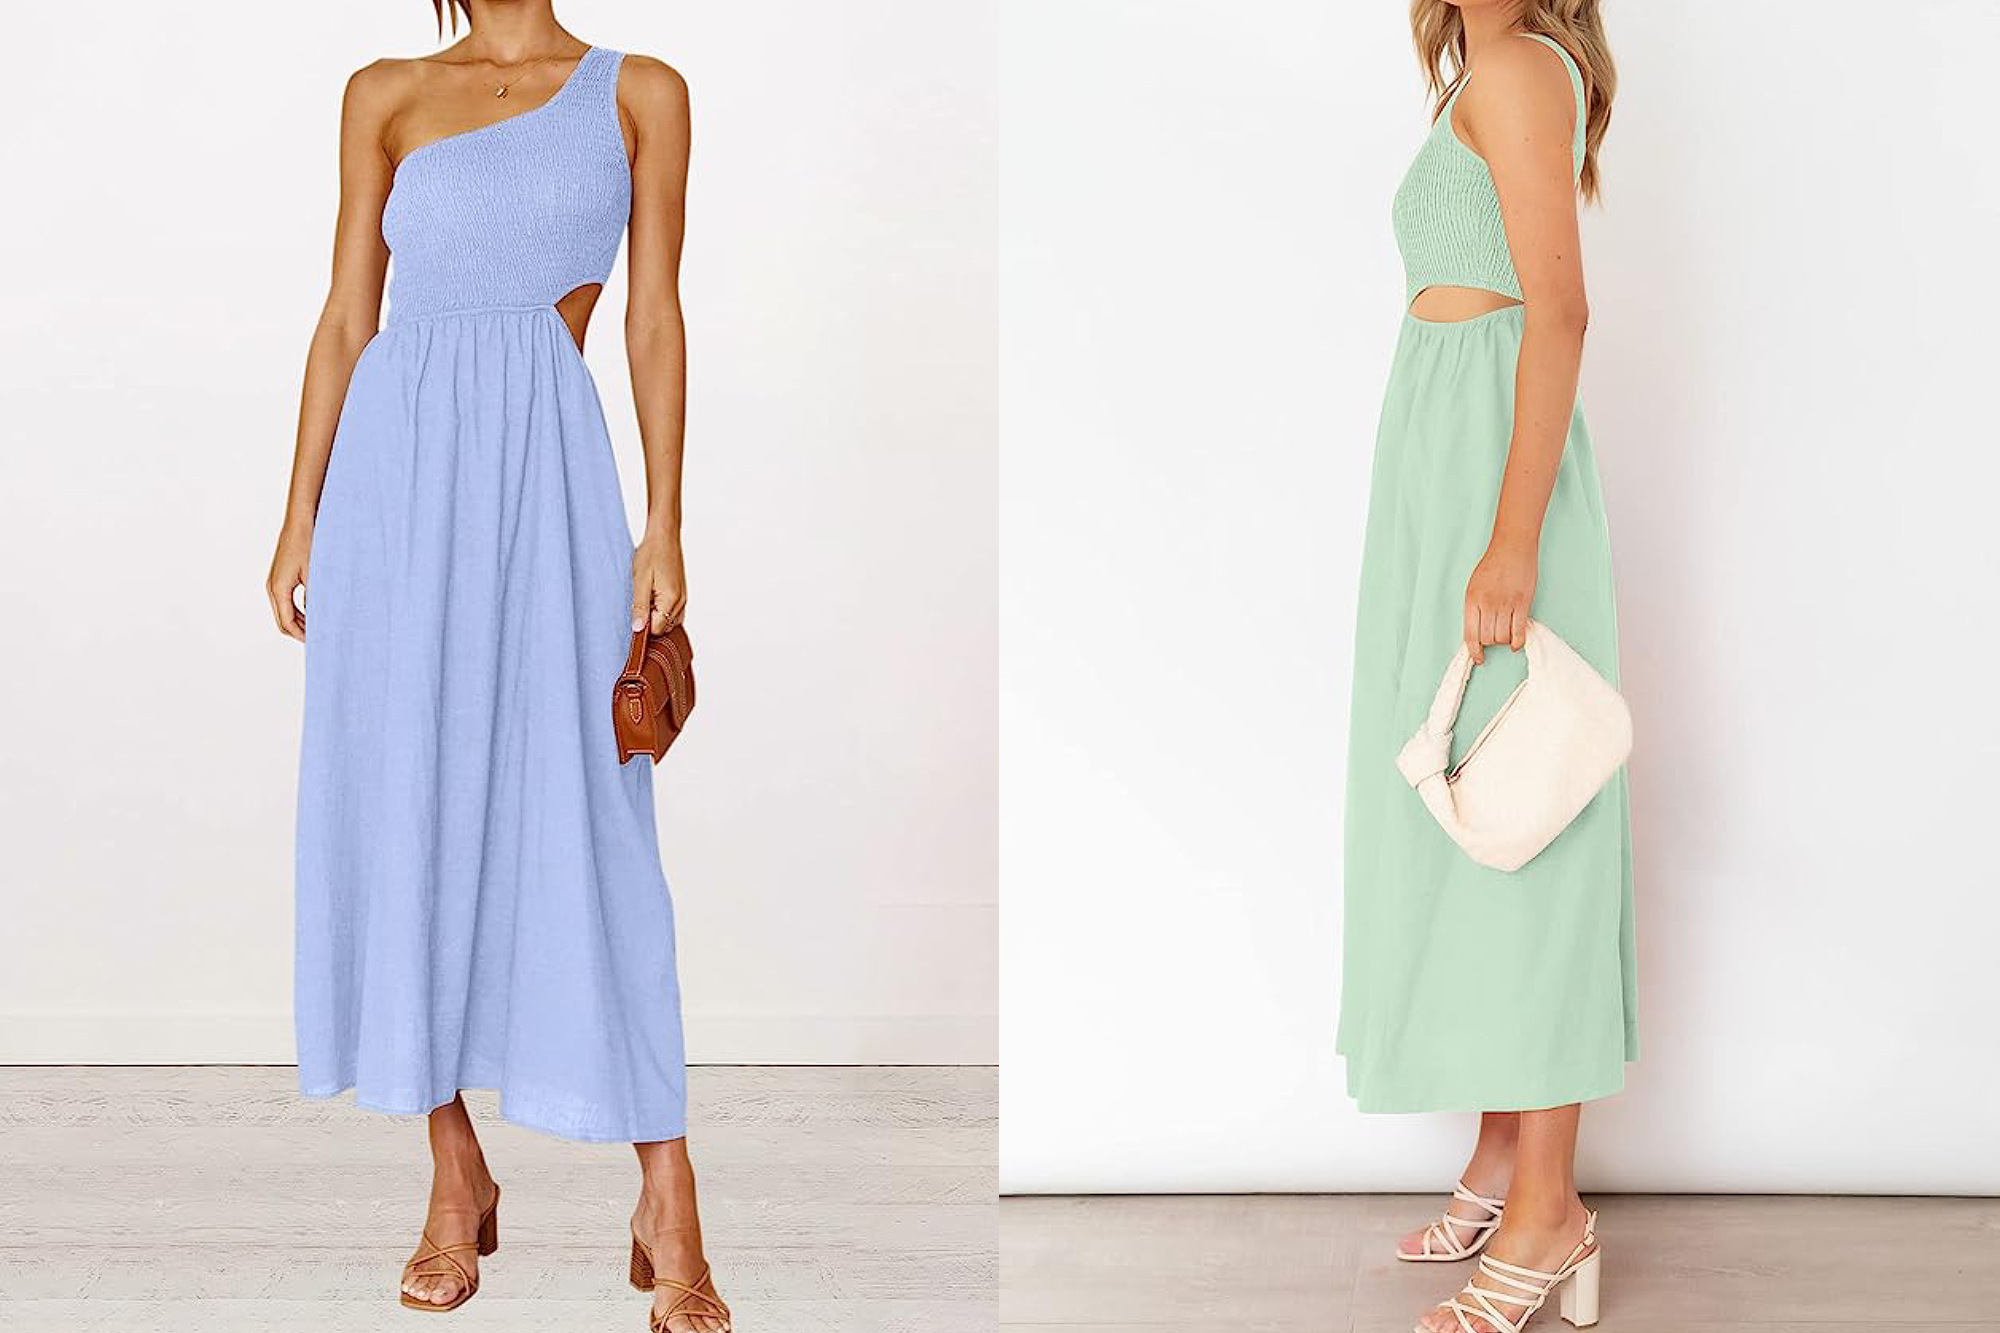 Kirundo One-Shoulder Dress Is a Perfect Day-to-Night Frock